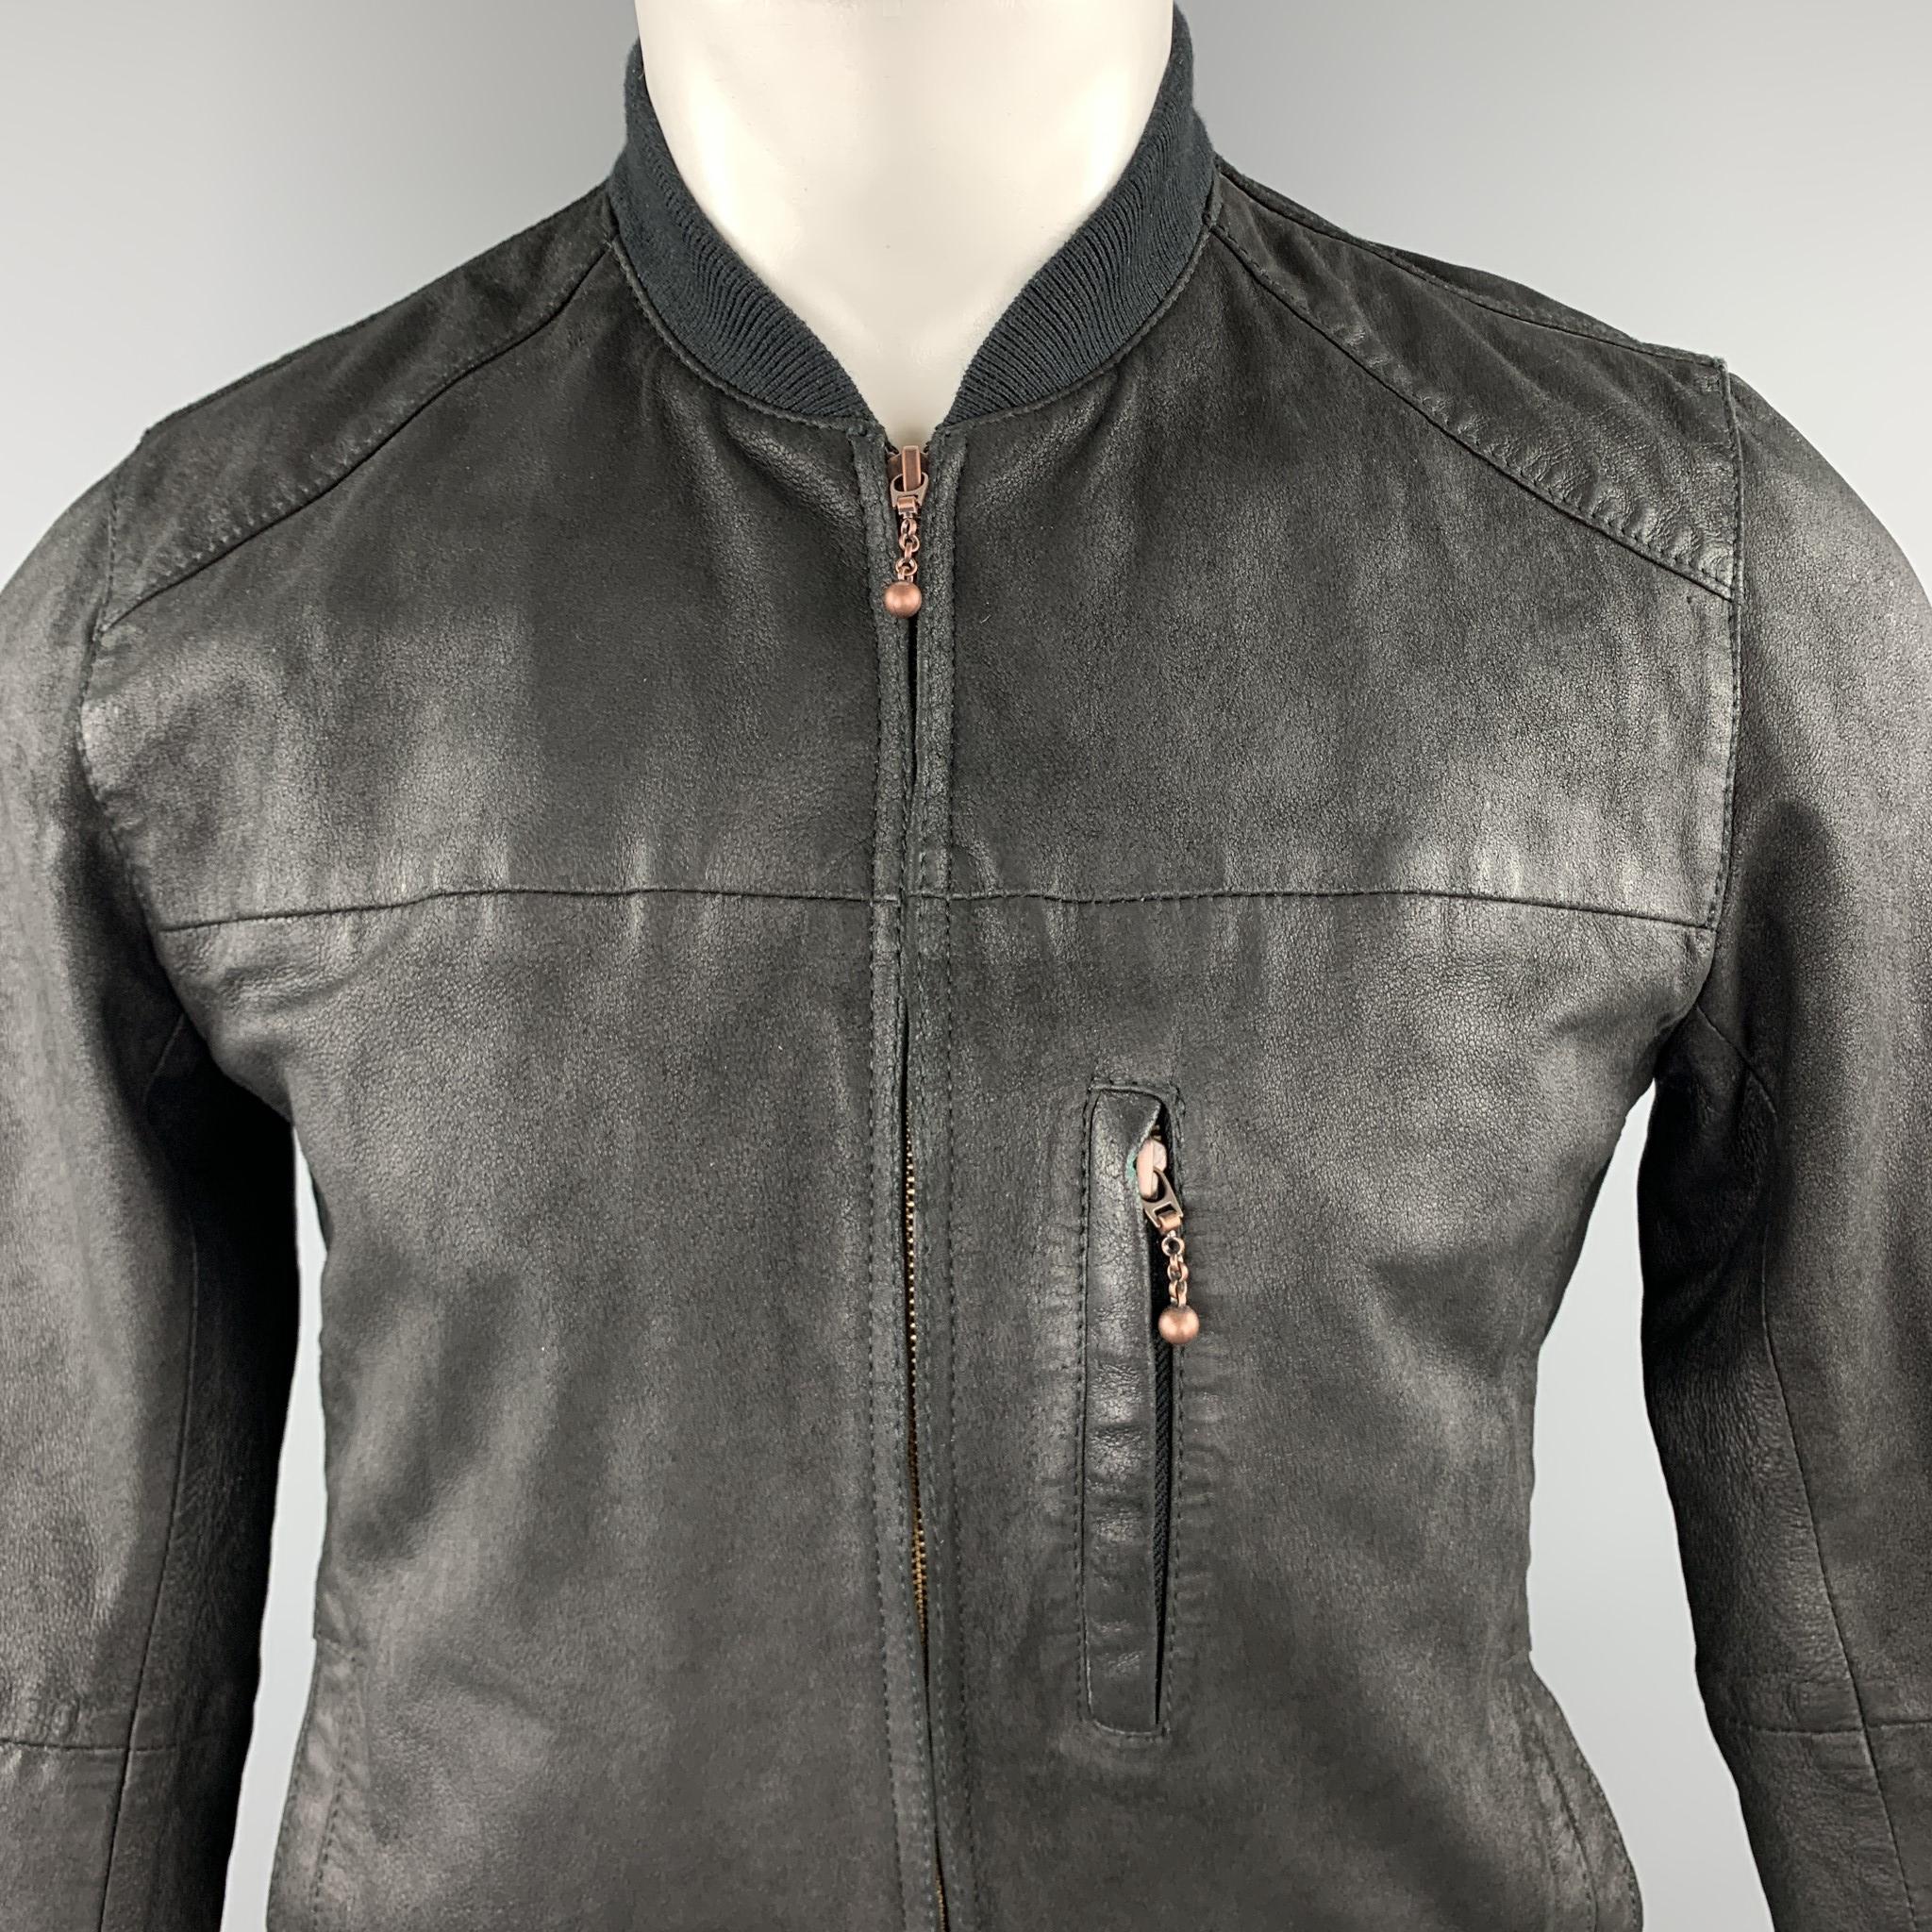 LEVI'S bomber jacket comes in a distressed leather with a baseball collar, zip front, and zip pocket. 

Excellent Pre-Owned Condition.
Marked: S

Measurements:

Shoulder: 16 in.
Chest: 40 in.
Sleeve: 24.5 in.
Length: 26 in.